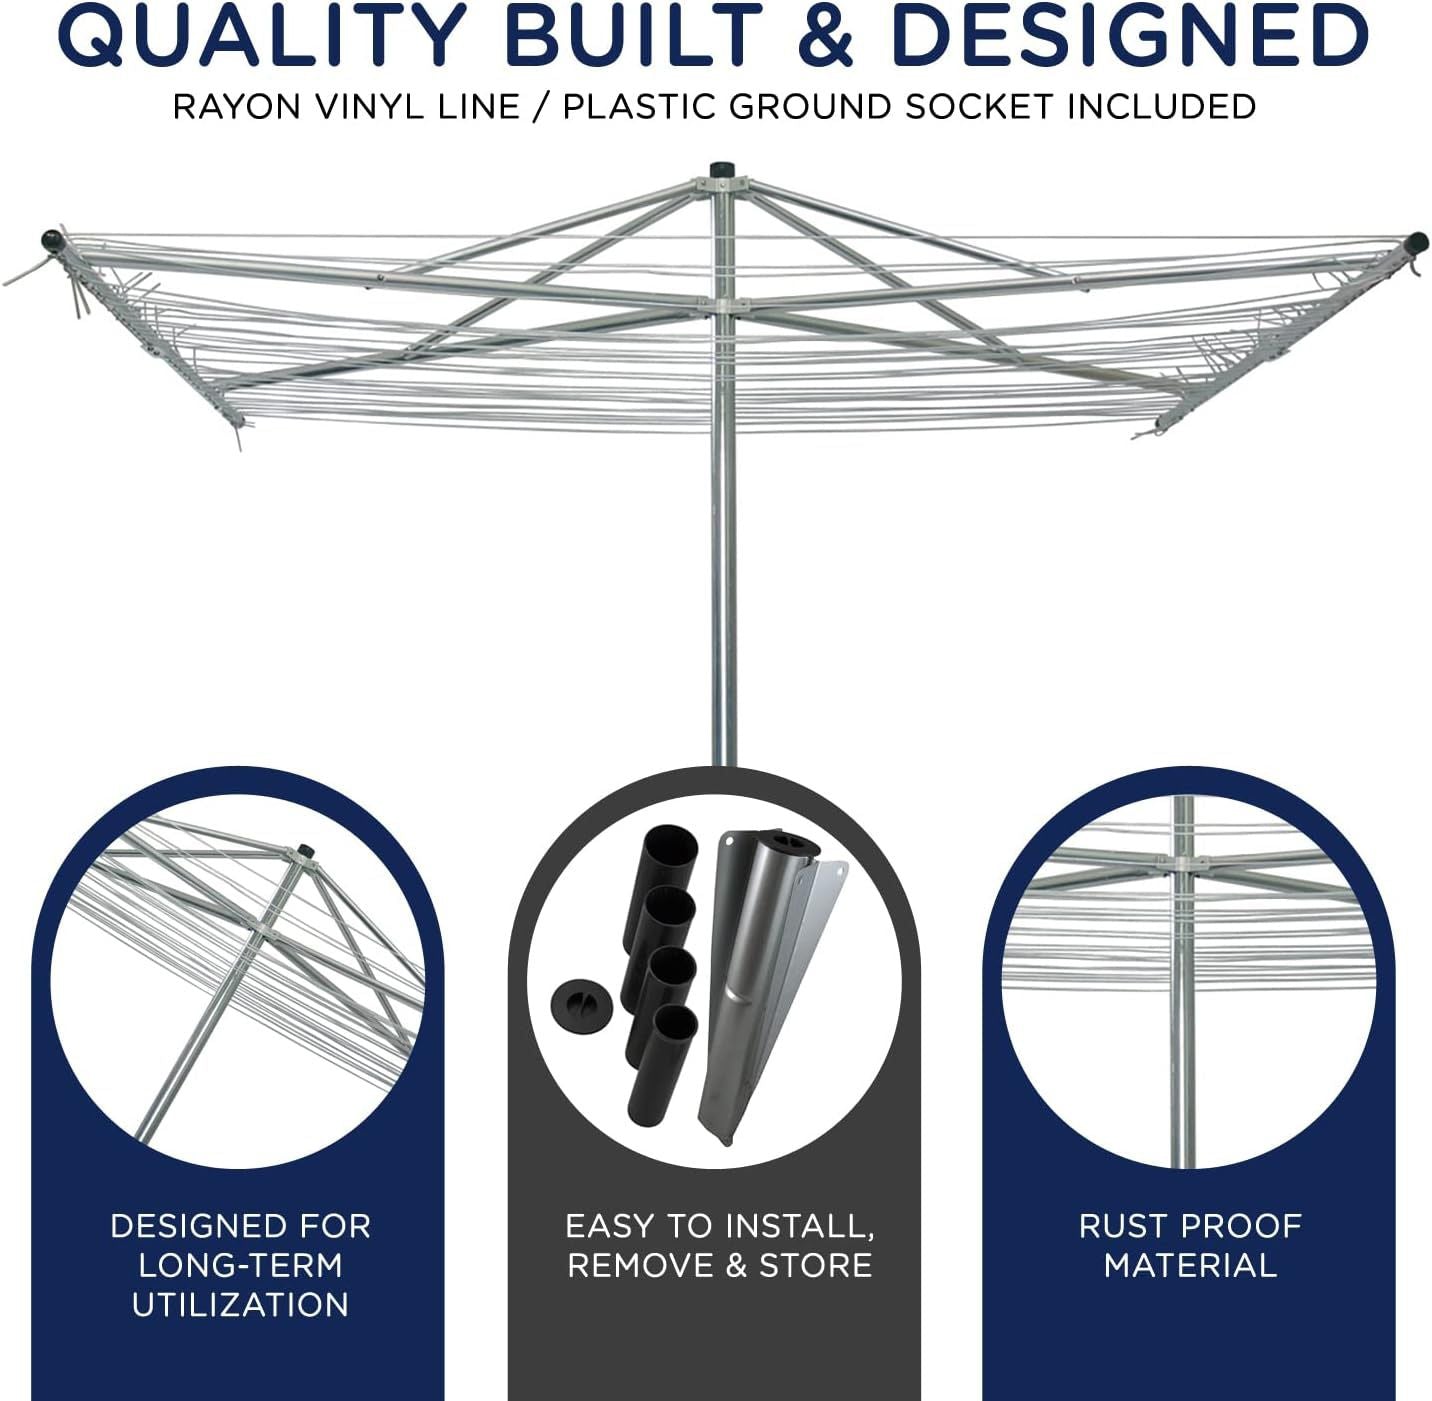 Strata Heavy Duty Parallel Rotary Outdoor Drying Rack - 184 Feet Umbrella Clothesline Dryer, Aluminum & Steel Frame Outside Clothes Drying Rack, Silve - Selzalot